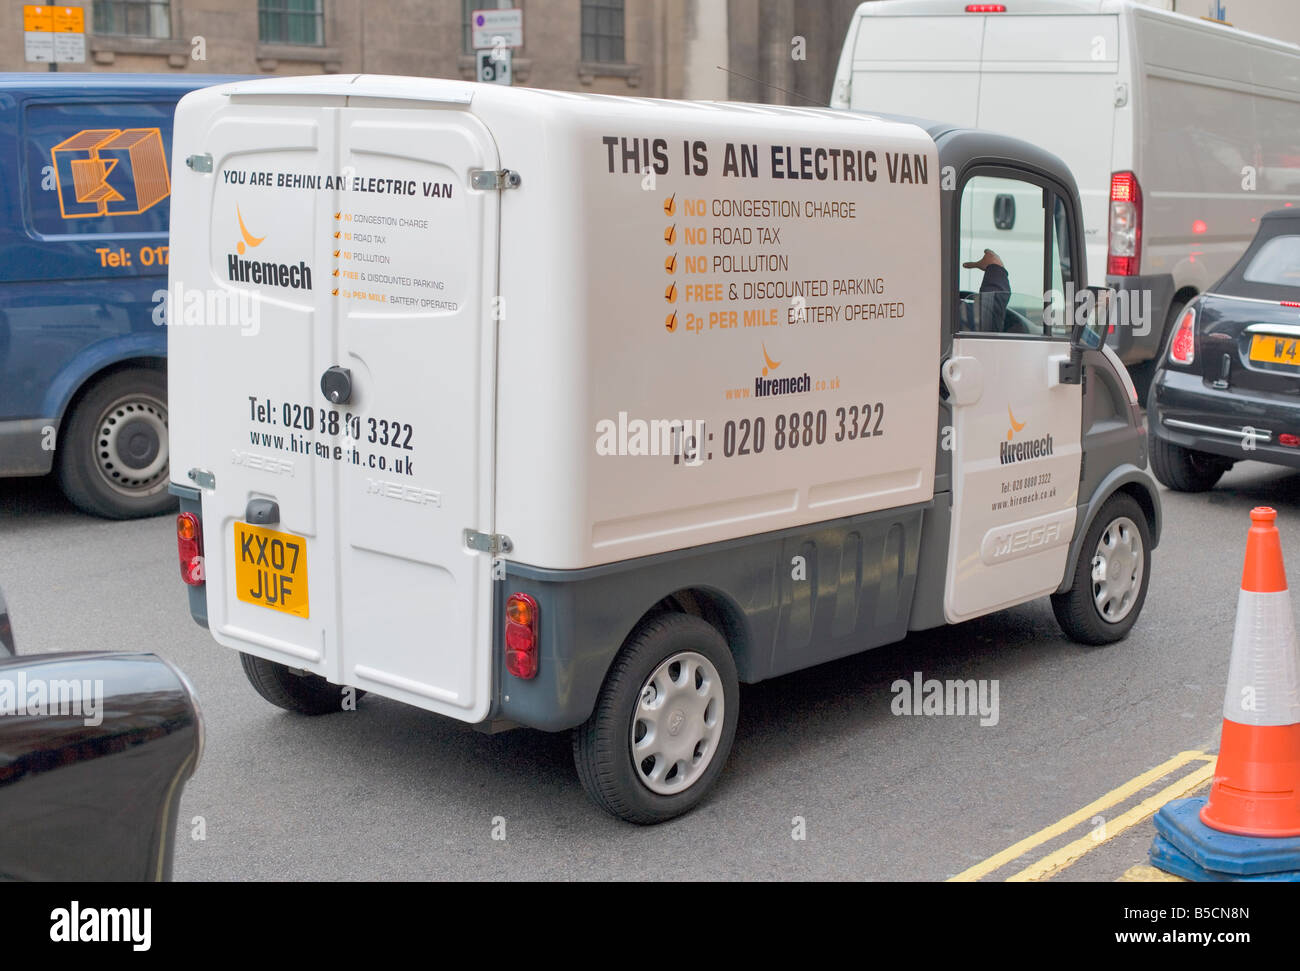 Electric vehicle in London traffic Stock Photo